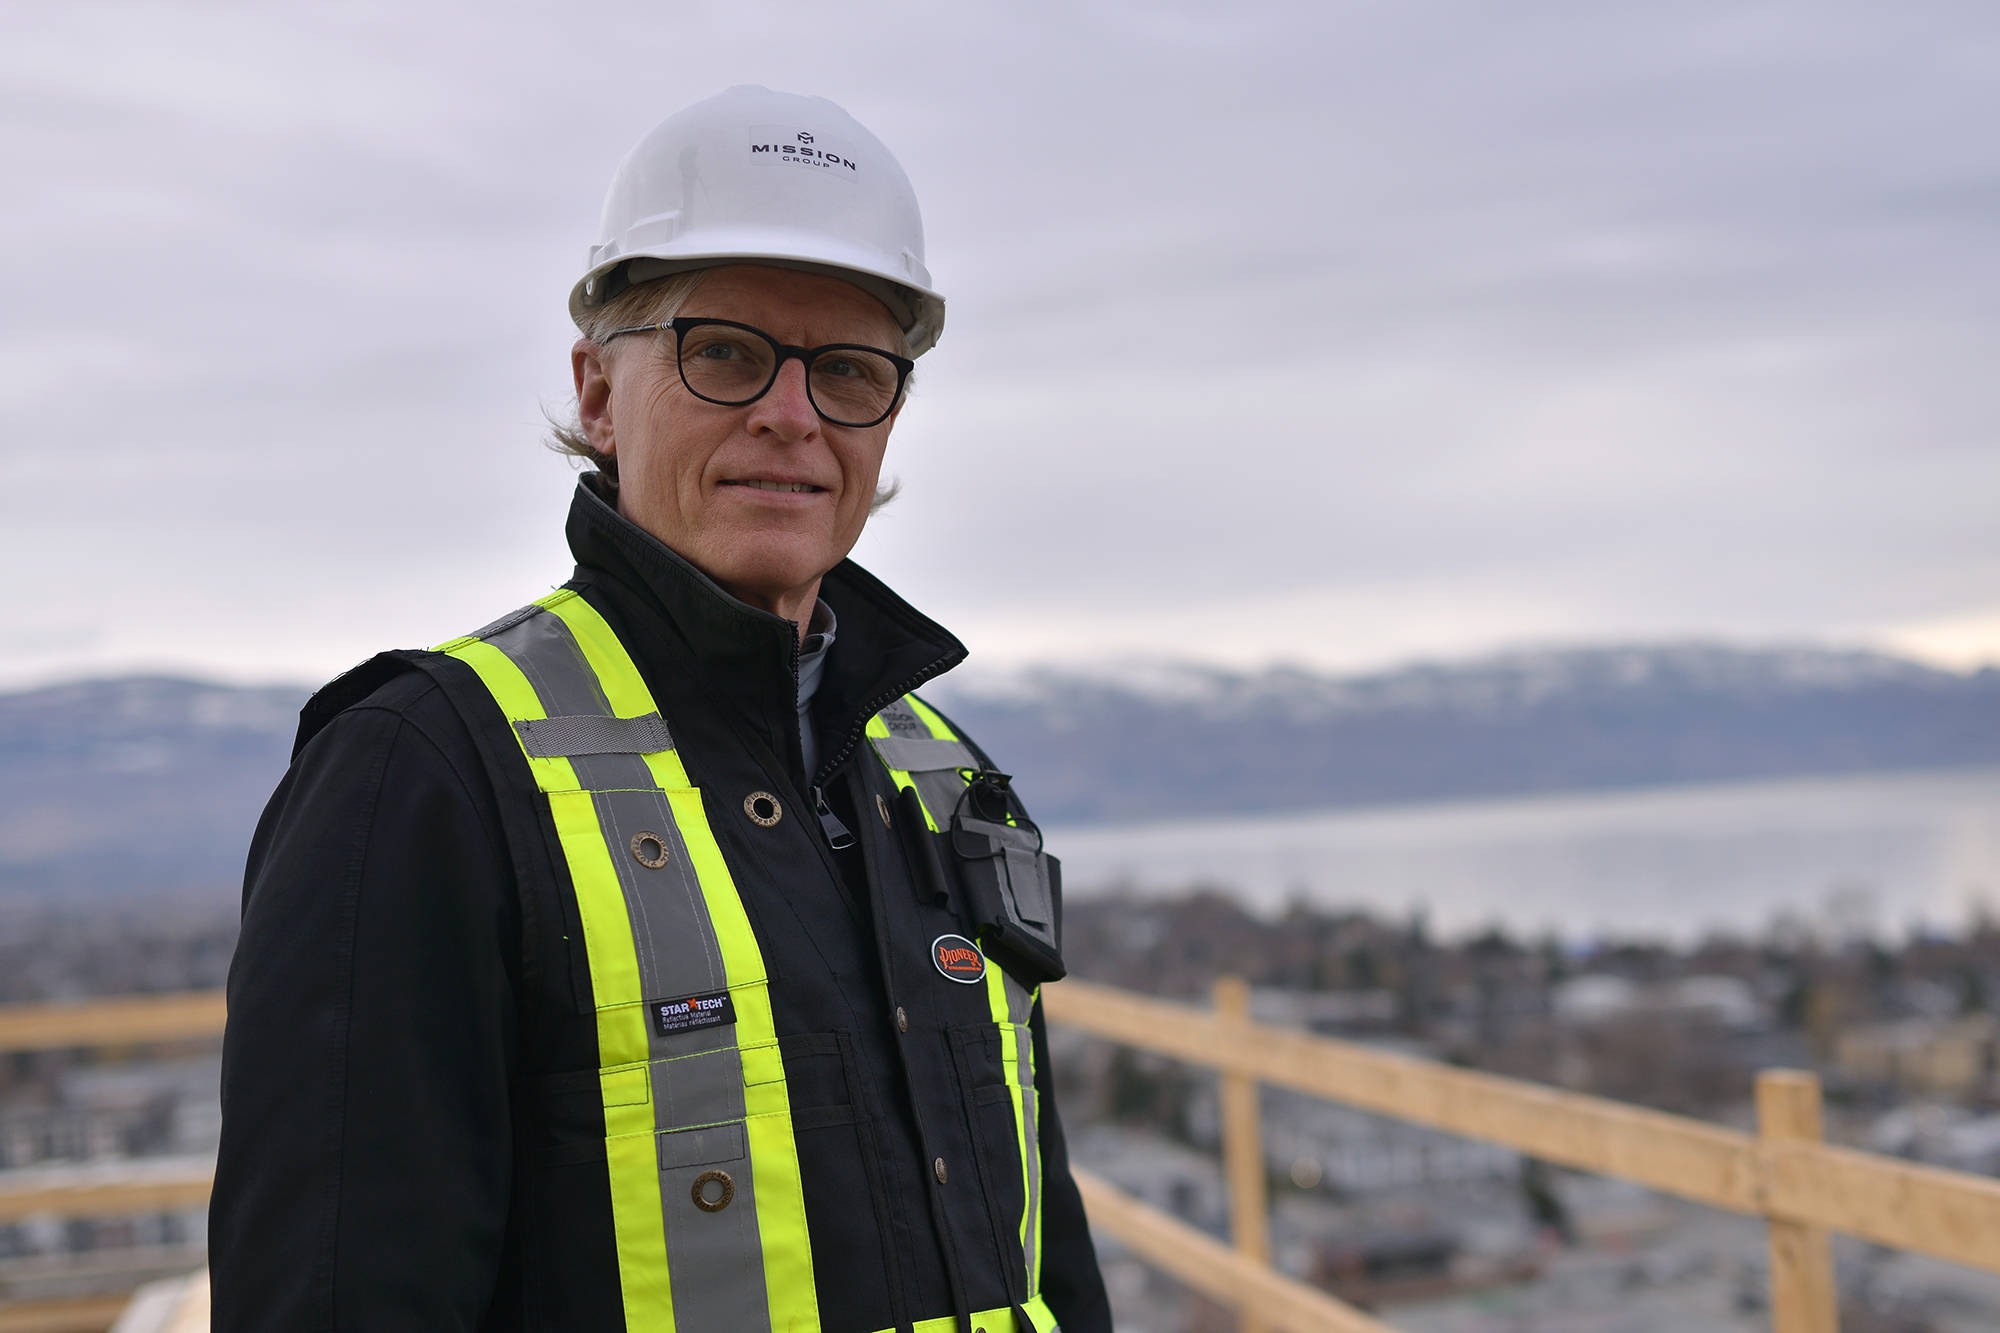 Brooklyn at Bernard Block, a 25-storey residential complex is nearing completion. Pictured above is Mission Group President, Randy Shier atop Brooklyn. (Phil McLachlan - Capital News)